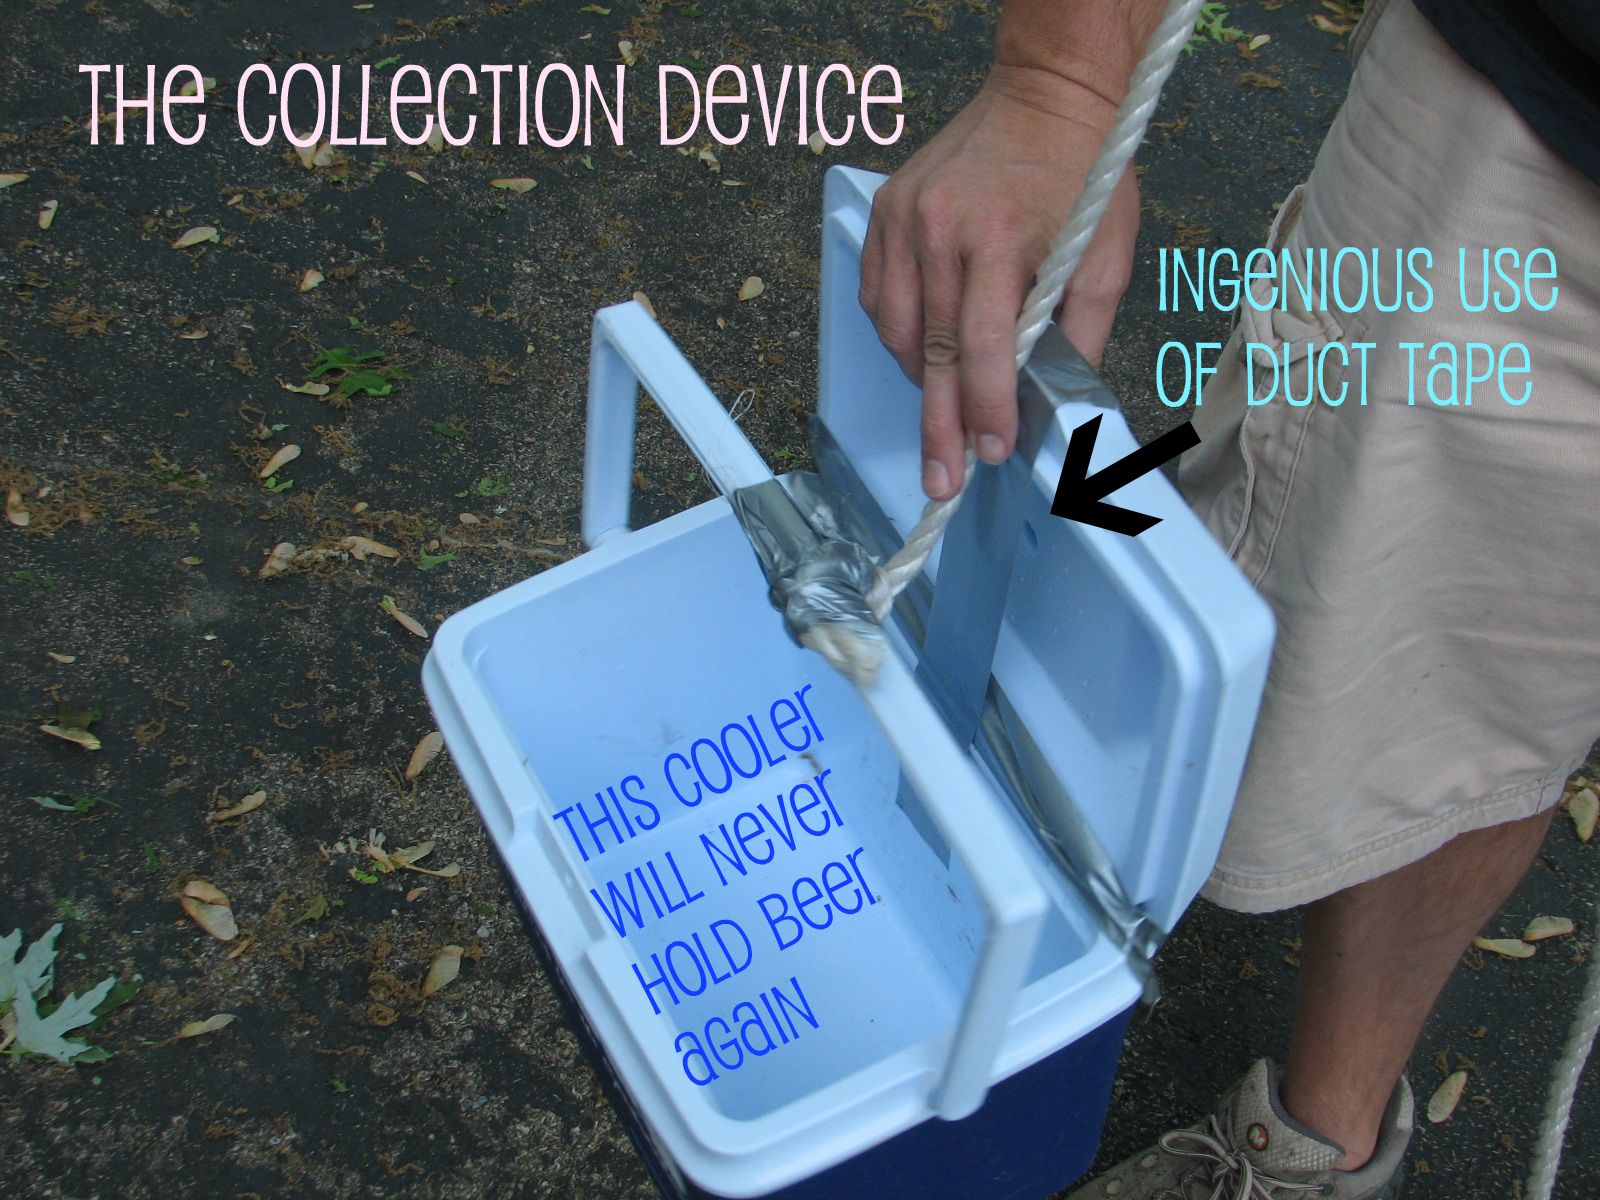 [The+Collection+Device.jpg]